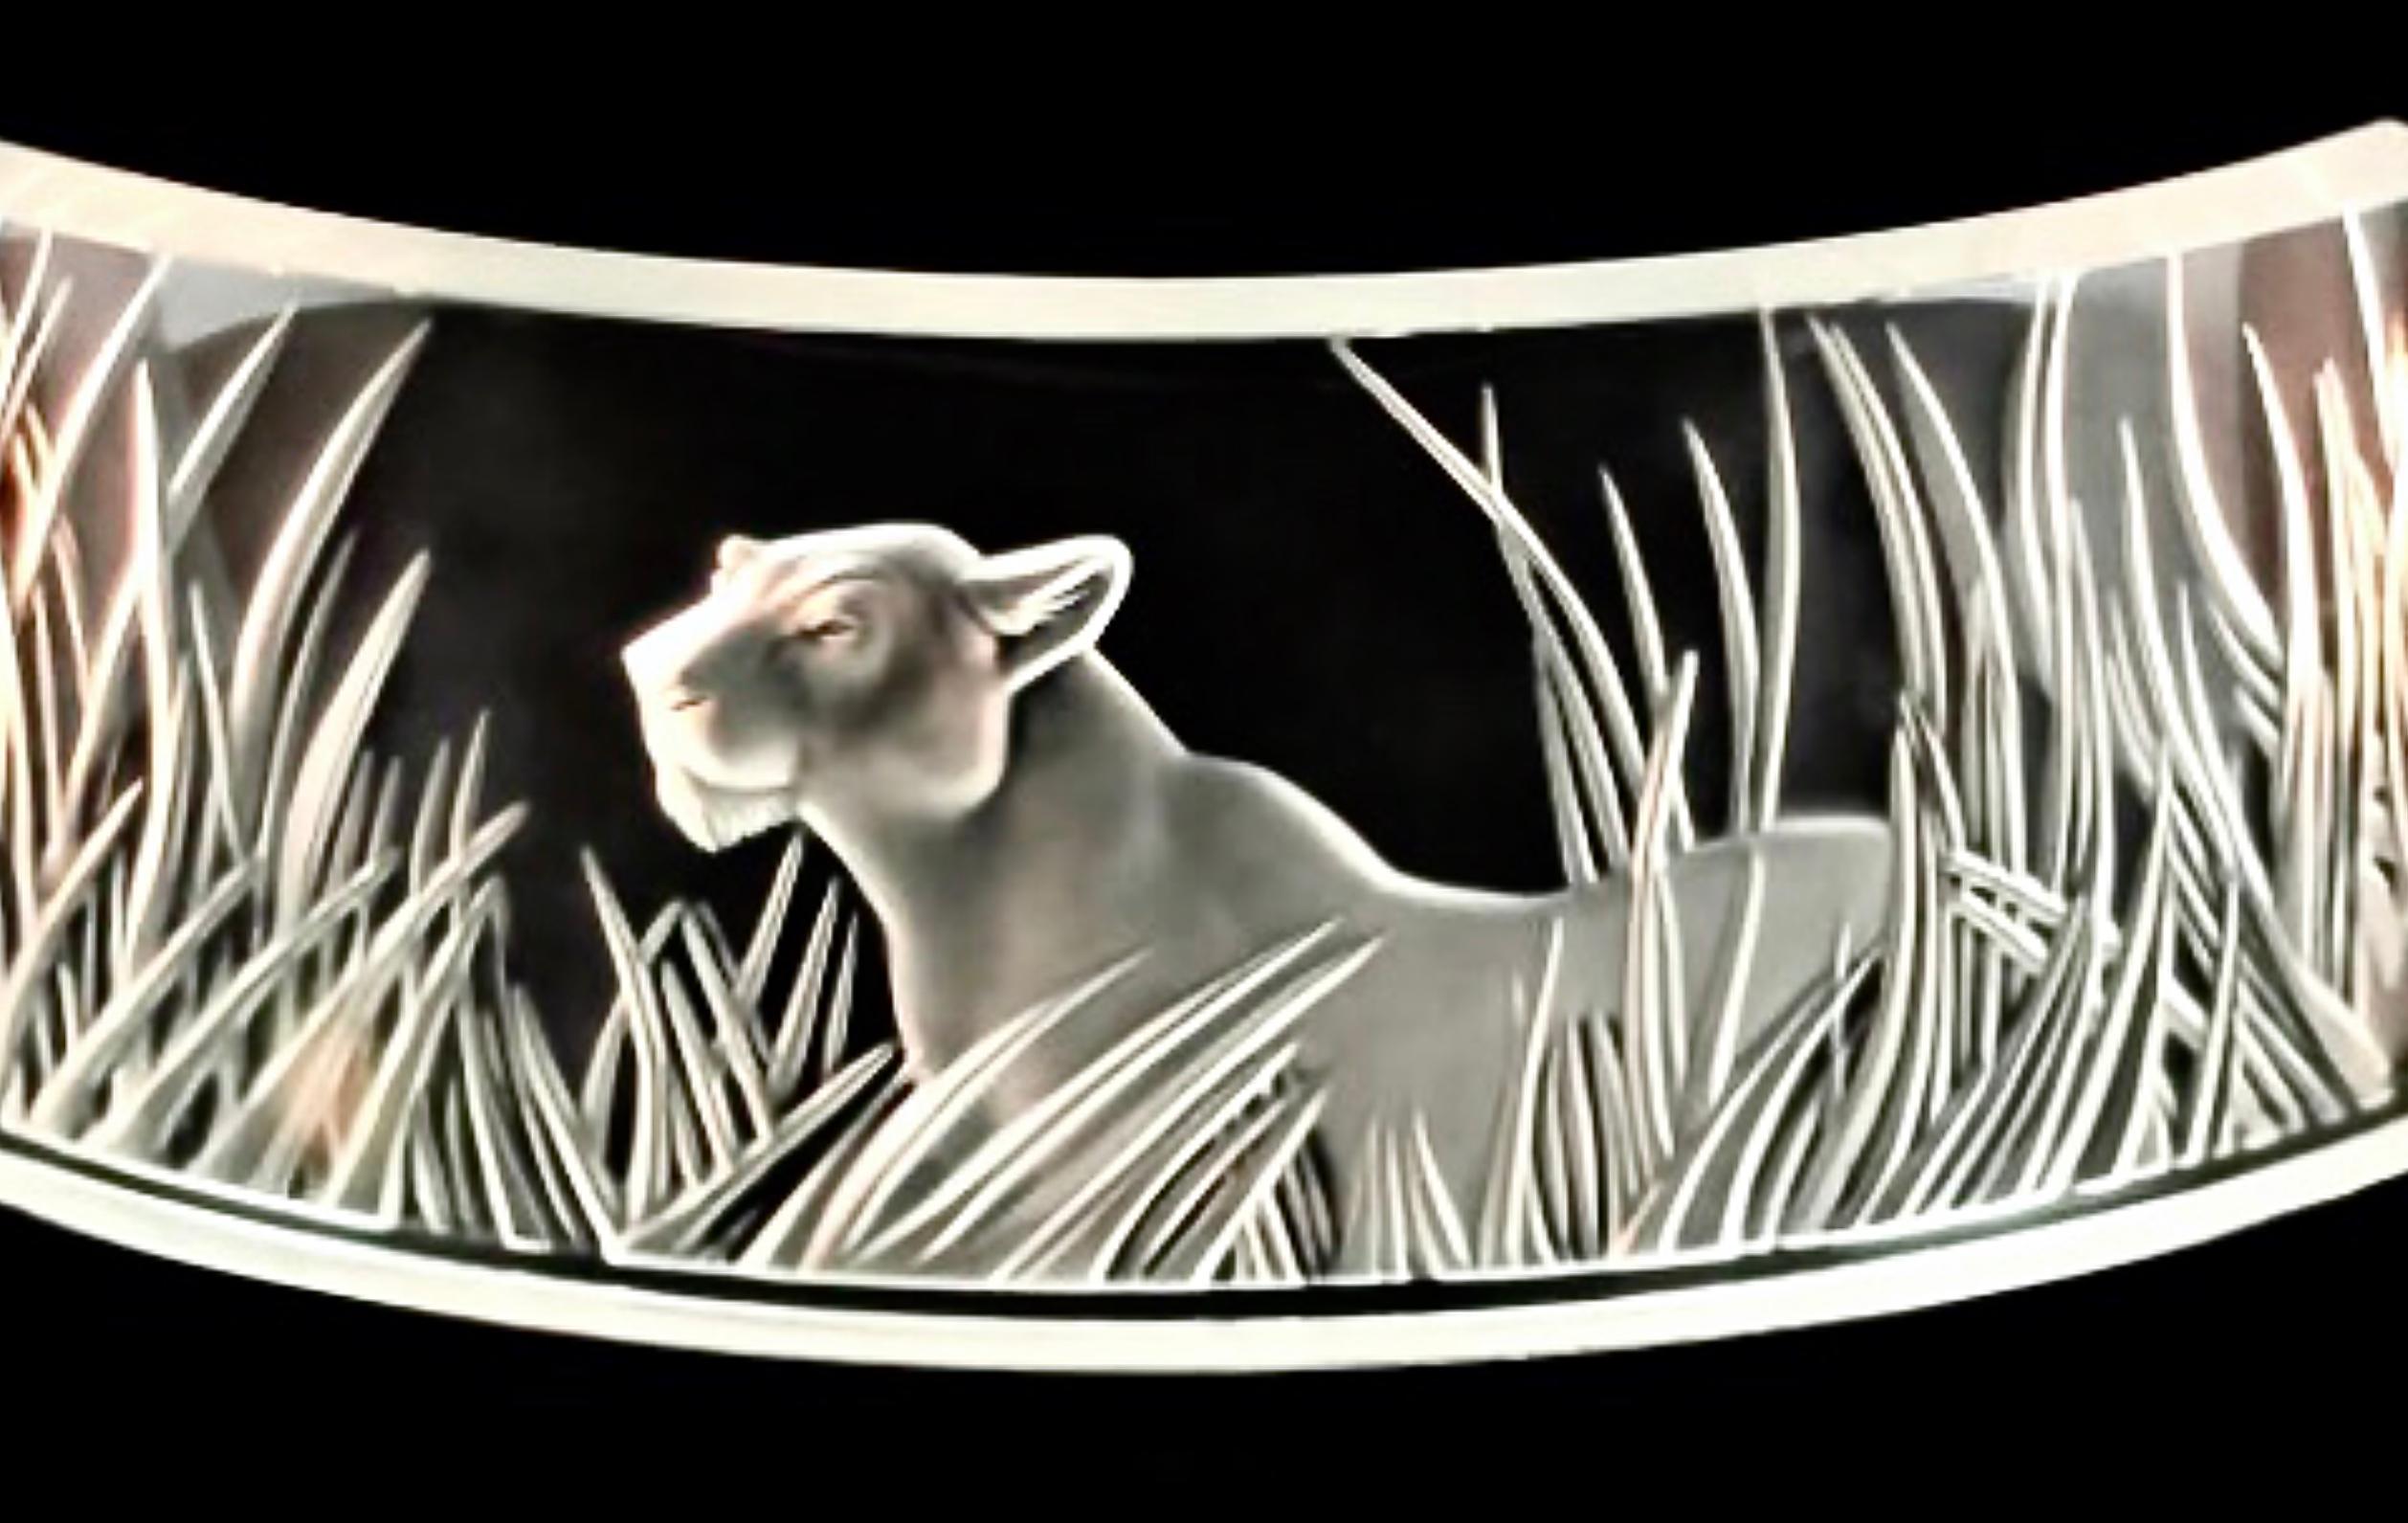 Lalique Kora large lioness crystal wall light, sconce, chromed steel frame, Signed. Limited edition. Retail price 11,950 USD. Thick cit curved glass. Lioness in wait in the brush.